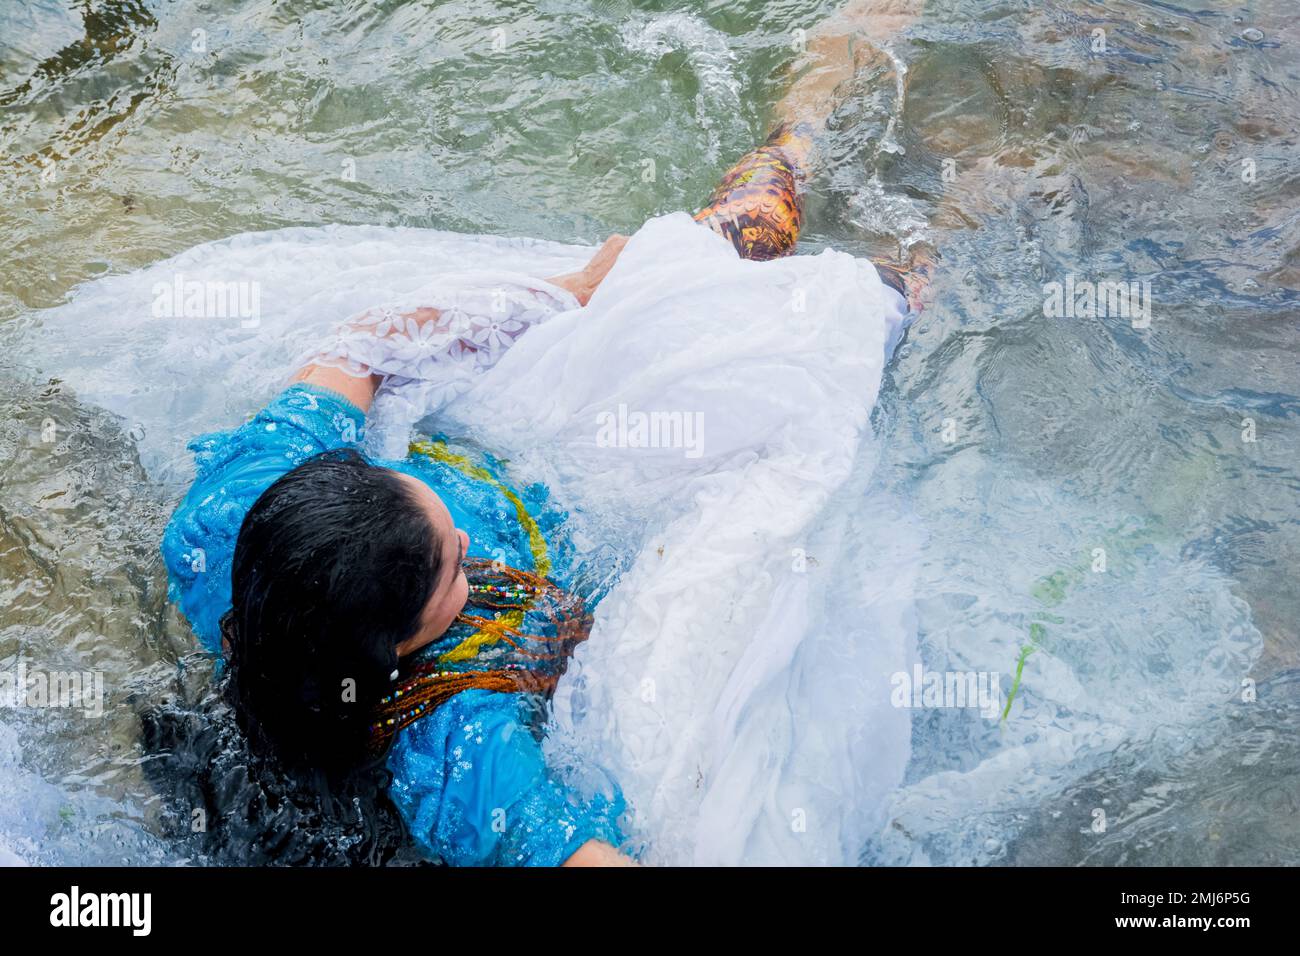 Salvador, Bahia, Brazil - February 02, 2017: Woman bathes in the sea during the party in honor of Iemanja. Salvador, Bahia. Stock Photo